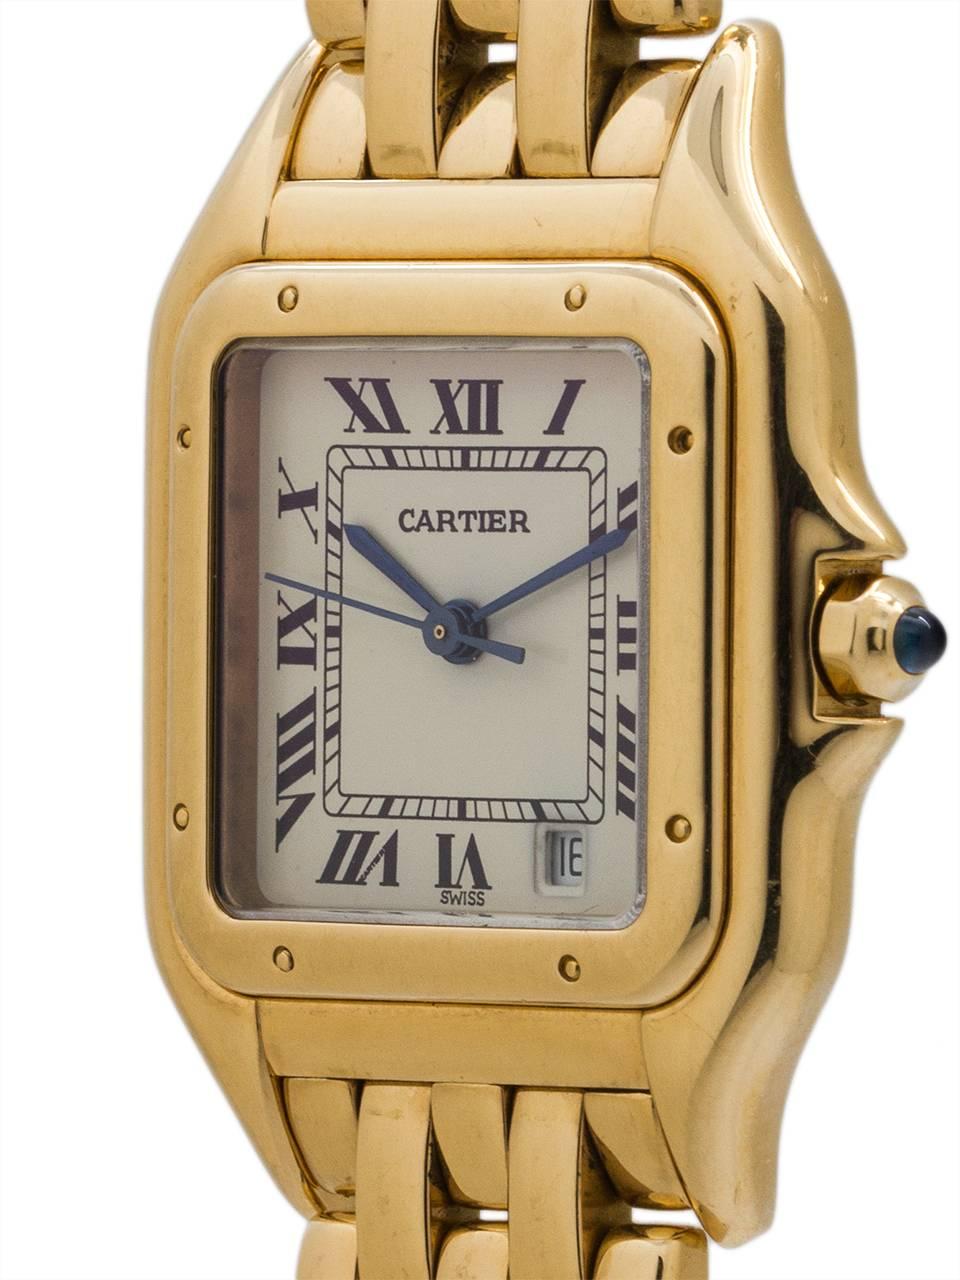 Cartier man's Panther model 18K yellow gold, circa 1980's. Featuring medium sized square 26.5 X 36mm case with domed stepped bezel secured by screws, antique white dial with classic Cartier Roman figures and blued steel hands. Powered by quartz